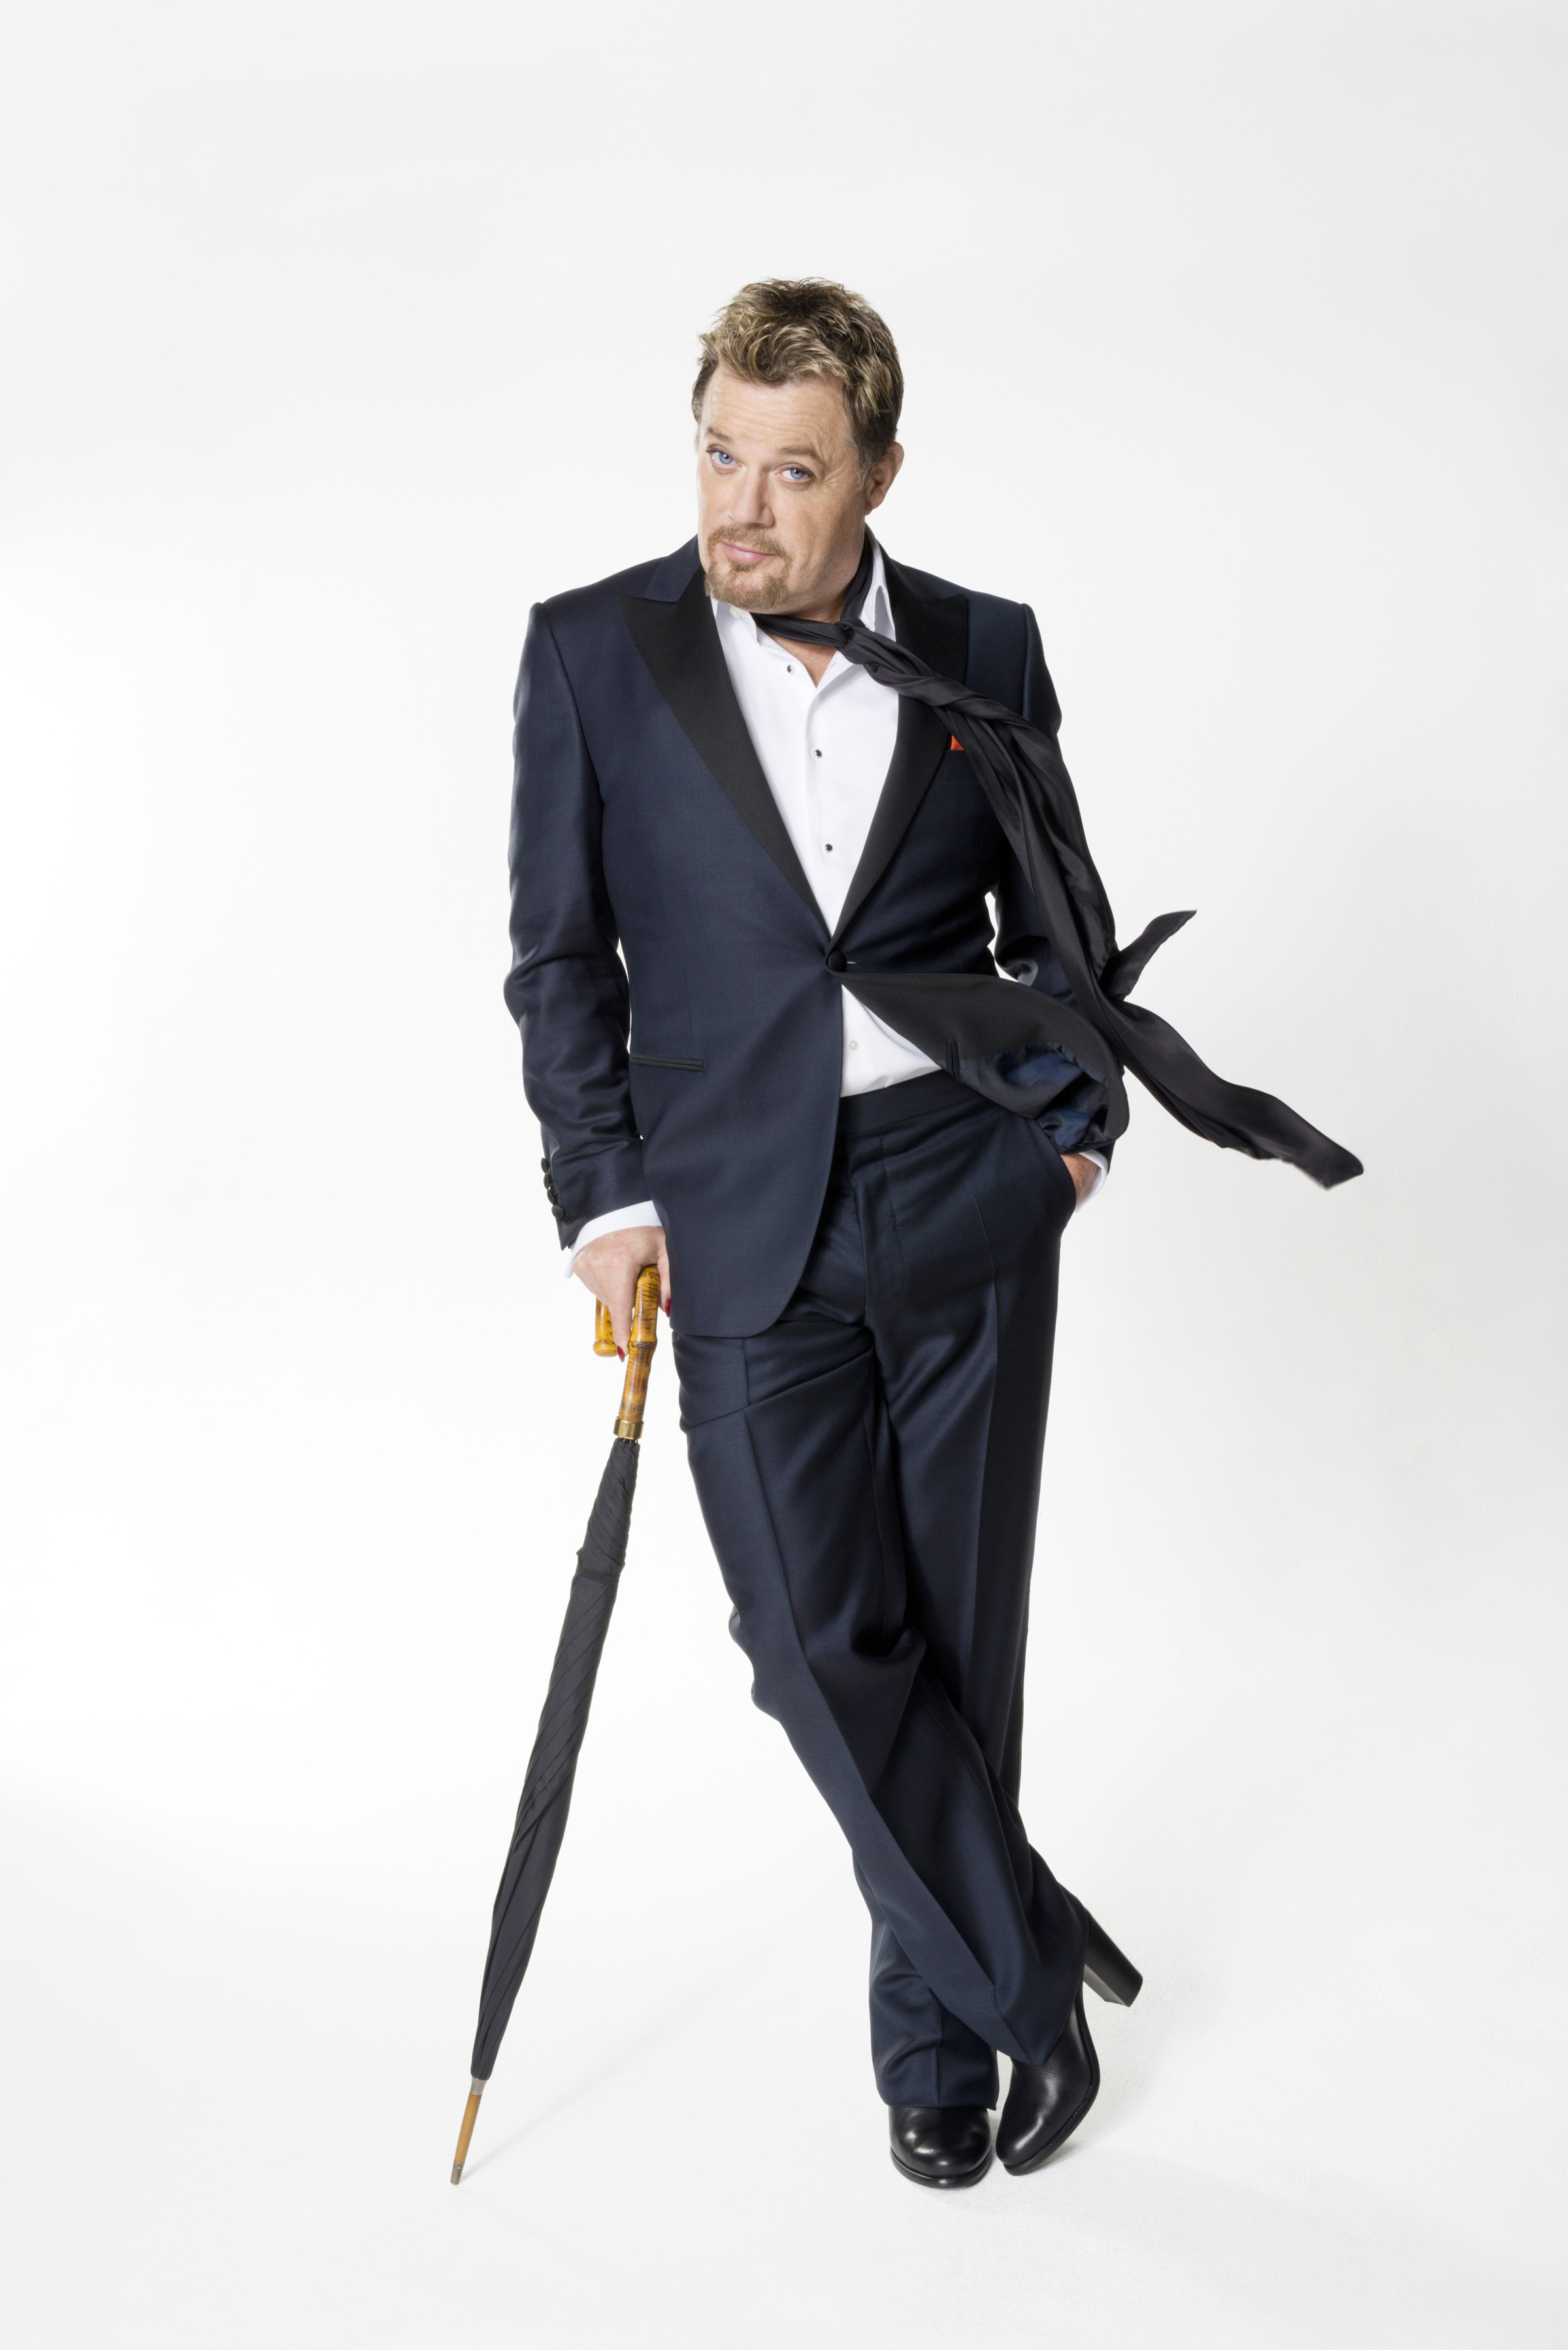 Eddie Izzard Force Majeure World Tour Coming to DPAC, Durham